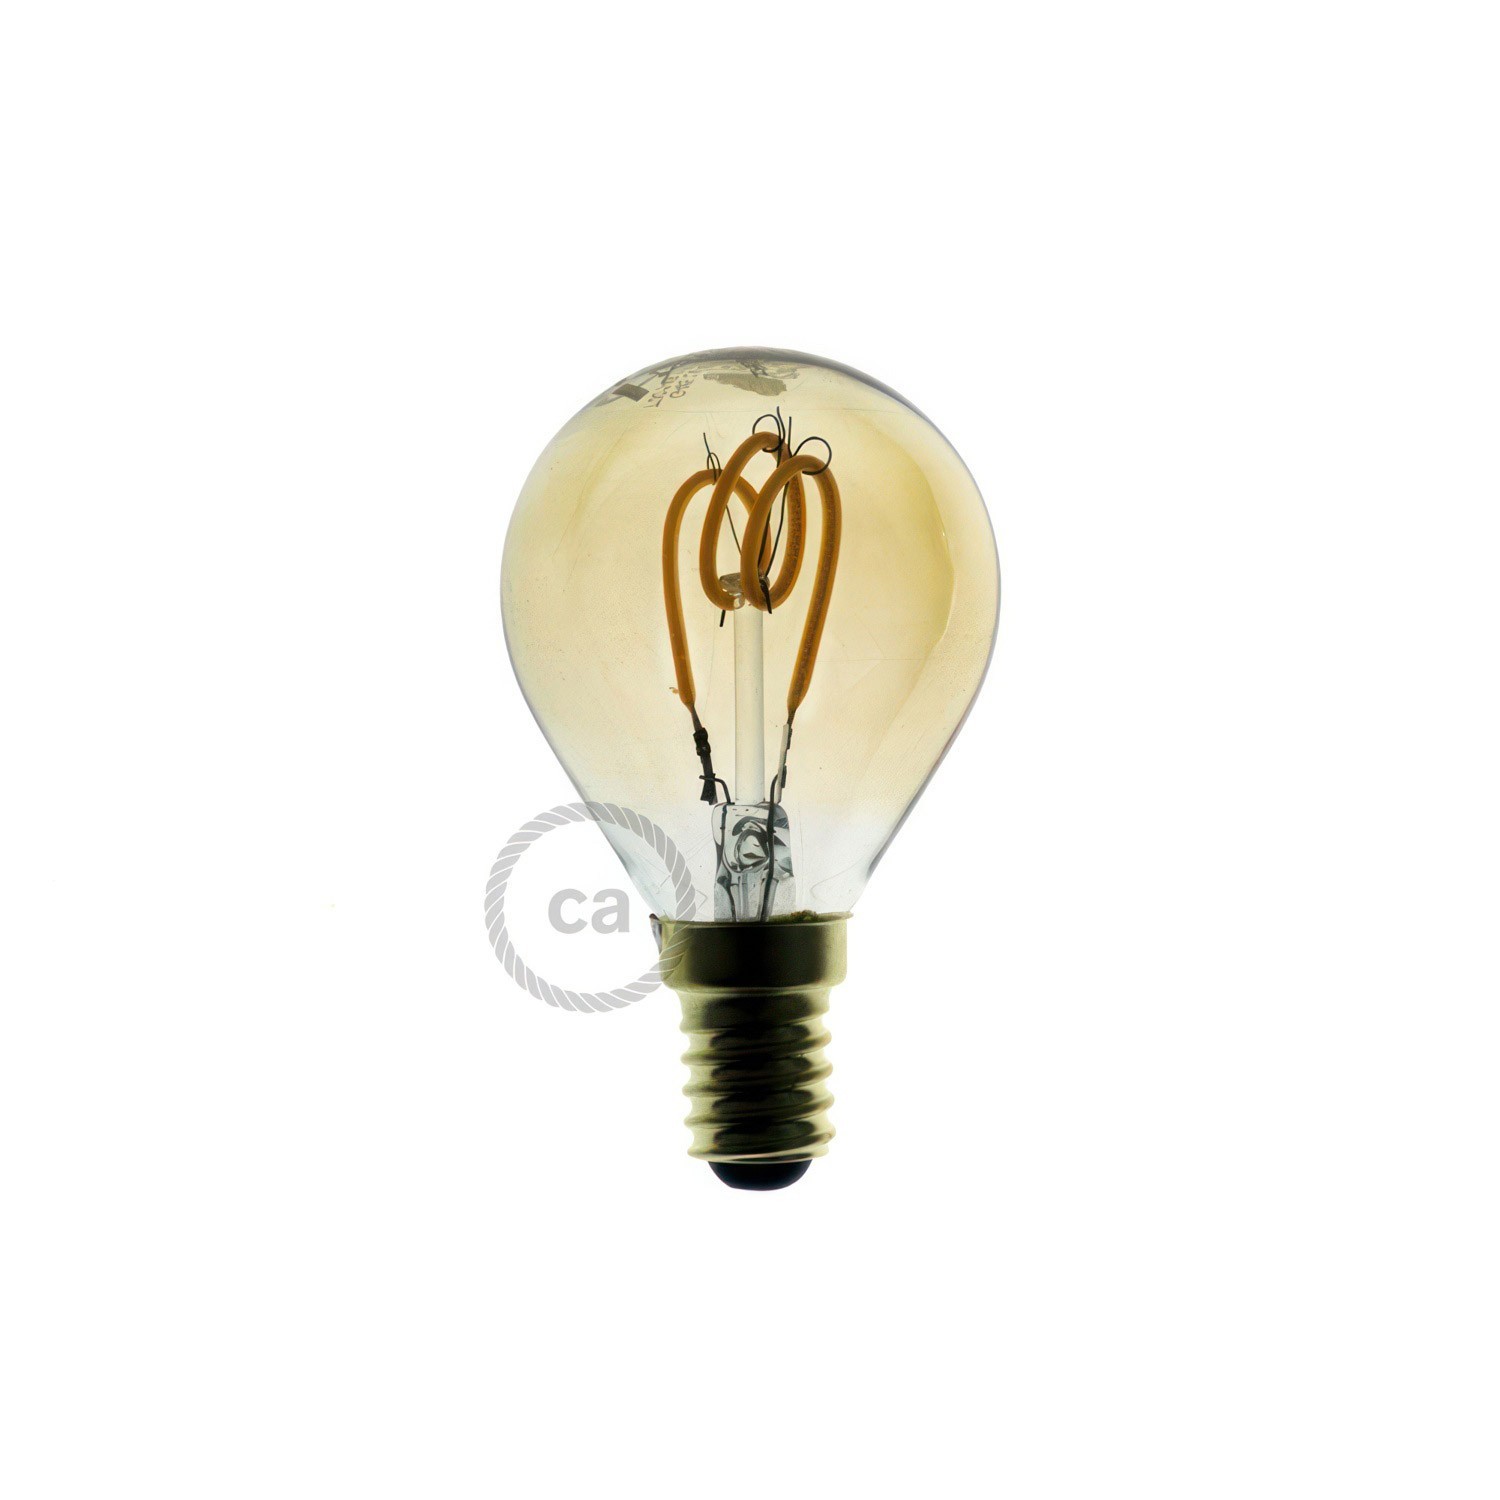 LED Golden Light Bulb - Sphere G45 Curved Spiral Filament - 3W 120Lm E14 2000K Dimmable